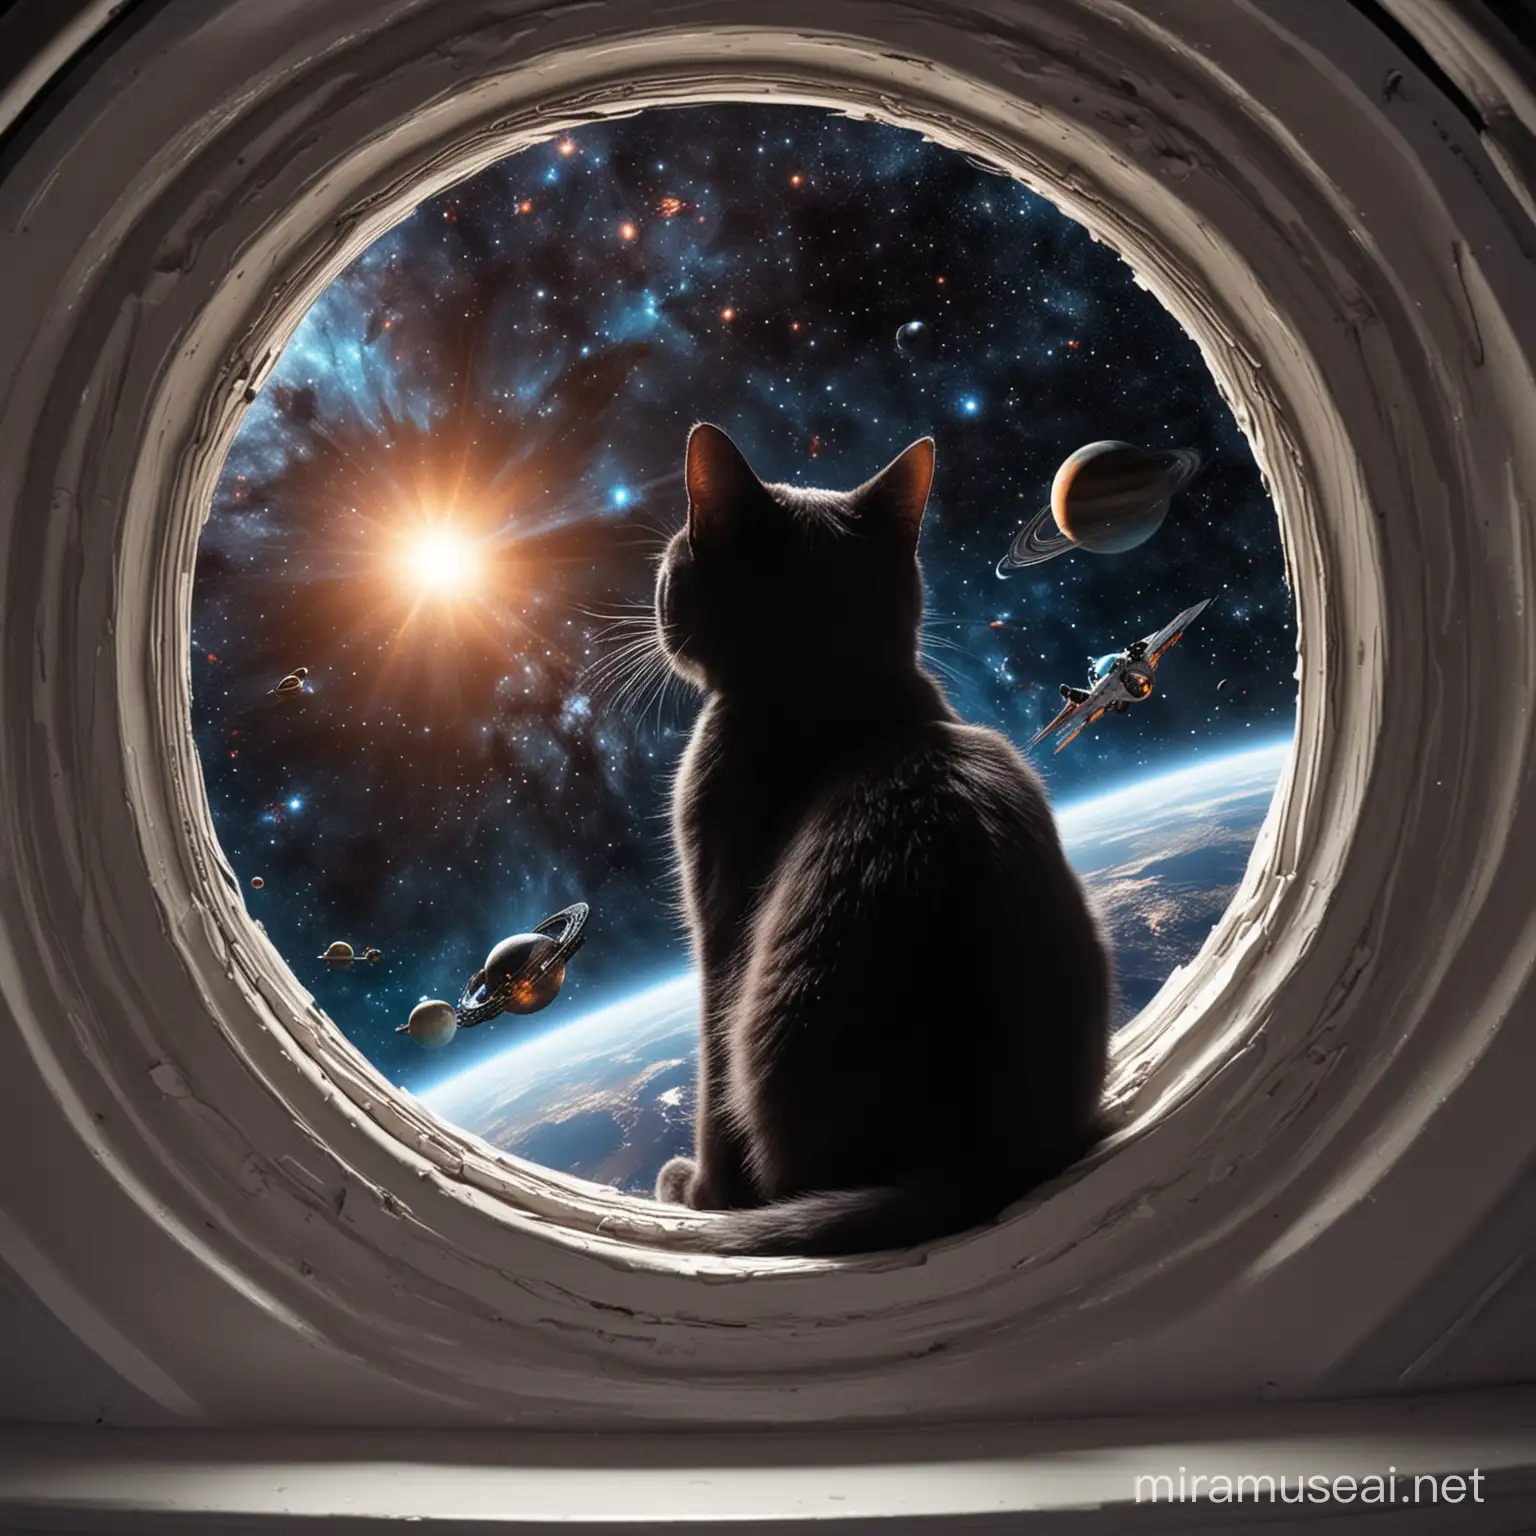 black cat, in space ship, looking out the window, black hole, planets, stars